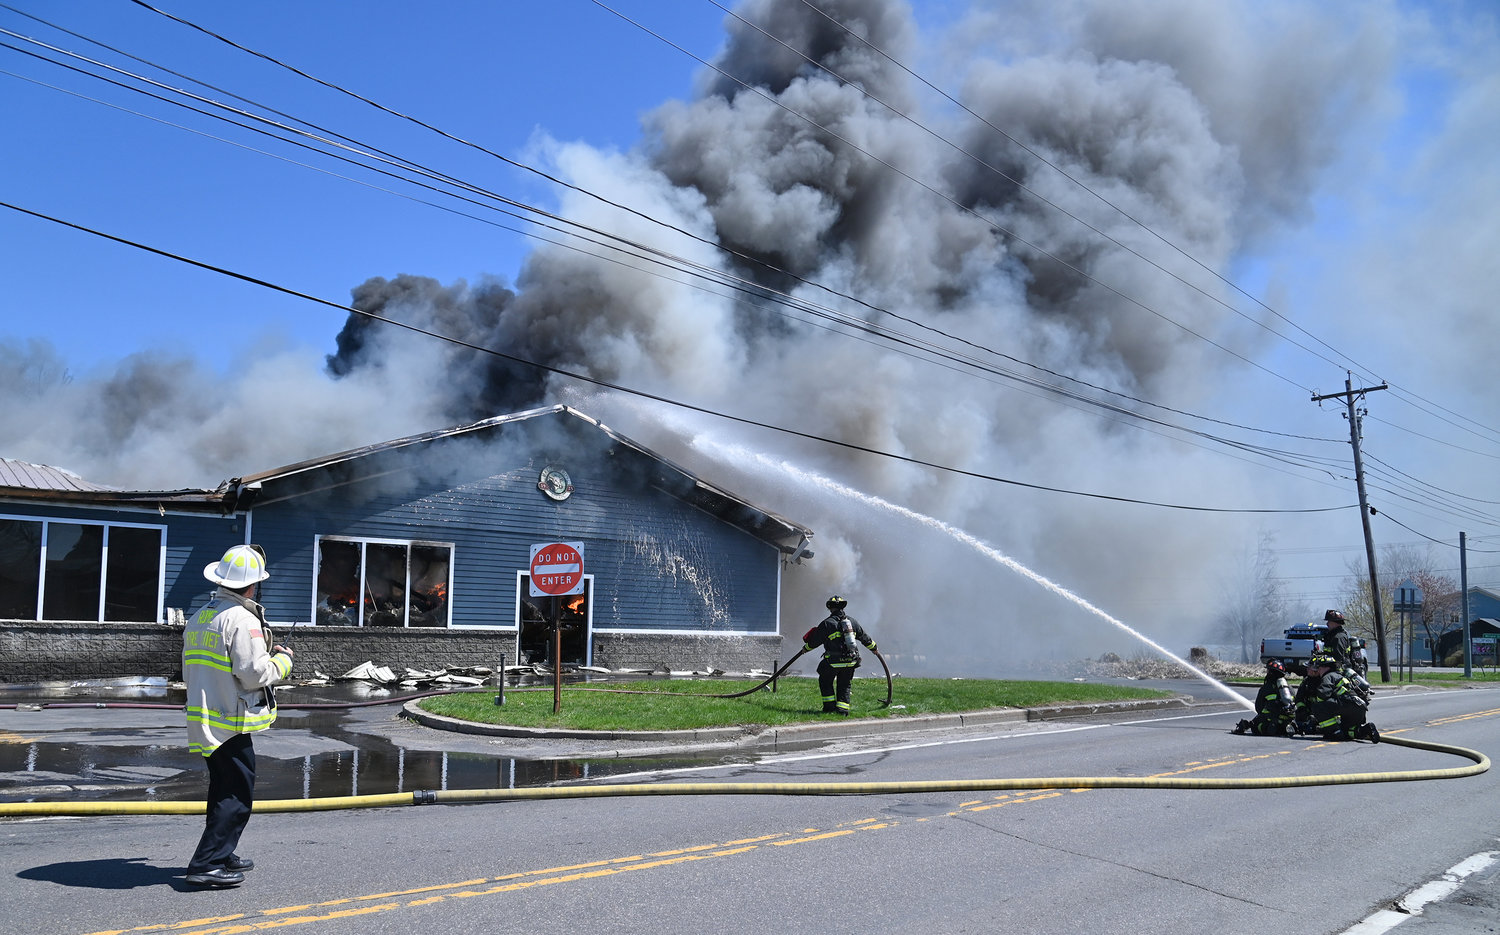 FOCUSED HOSE — One of several hose lines blasts water into the burning Mazzaferro's Meats & Deli on Ridge Mills Road in Rome Friday afternoon.